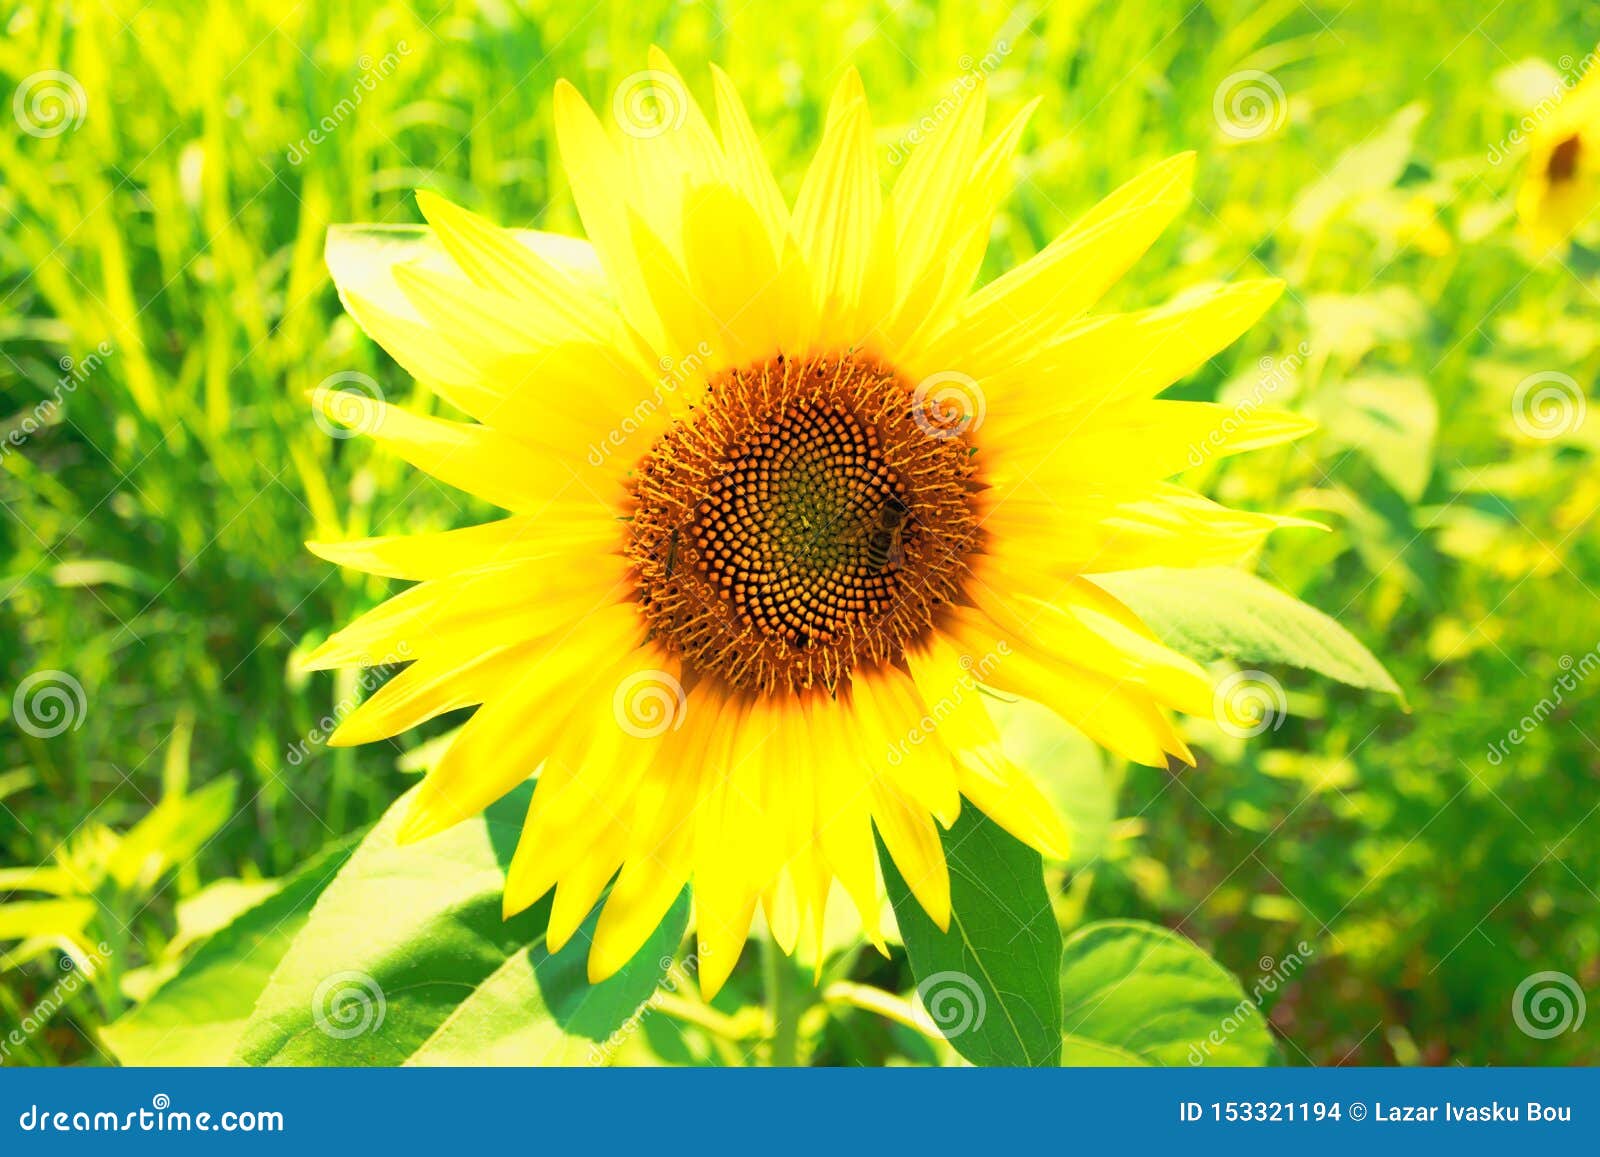 Bee on sunflower close up stock photo. Image of garden - 153321194